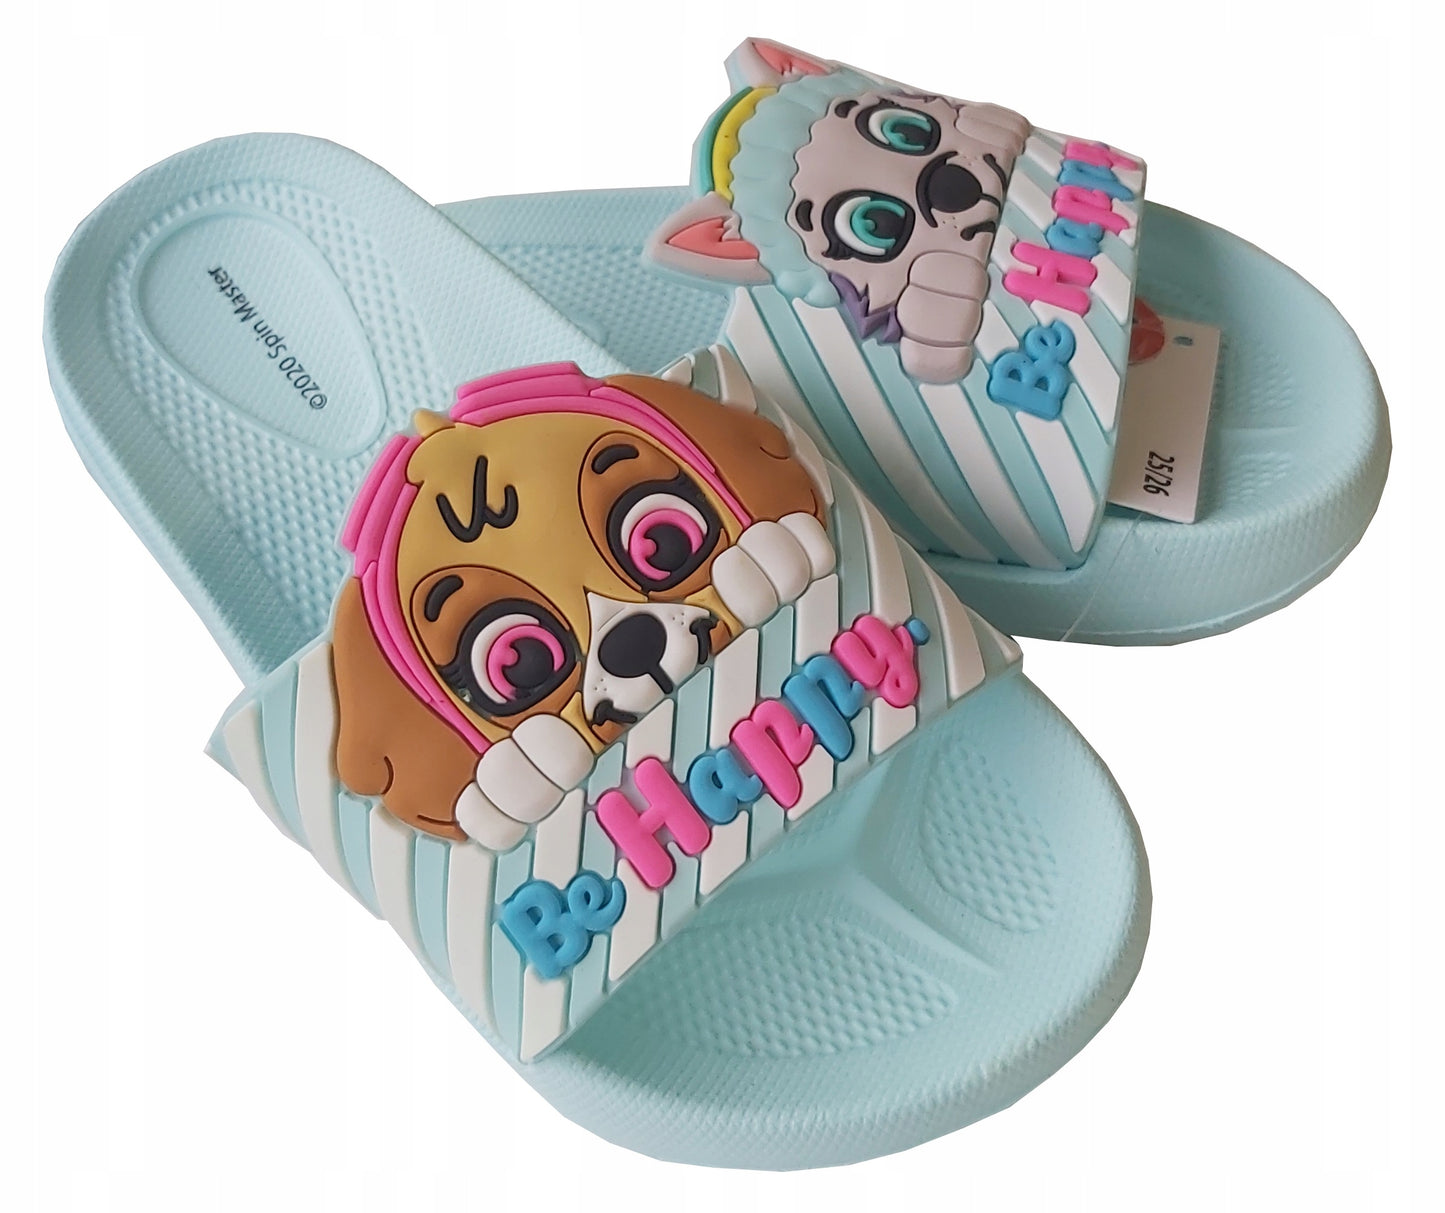 Paw Patrol Pool Beach Slippers PVC Sandals for Kids Turquoise